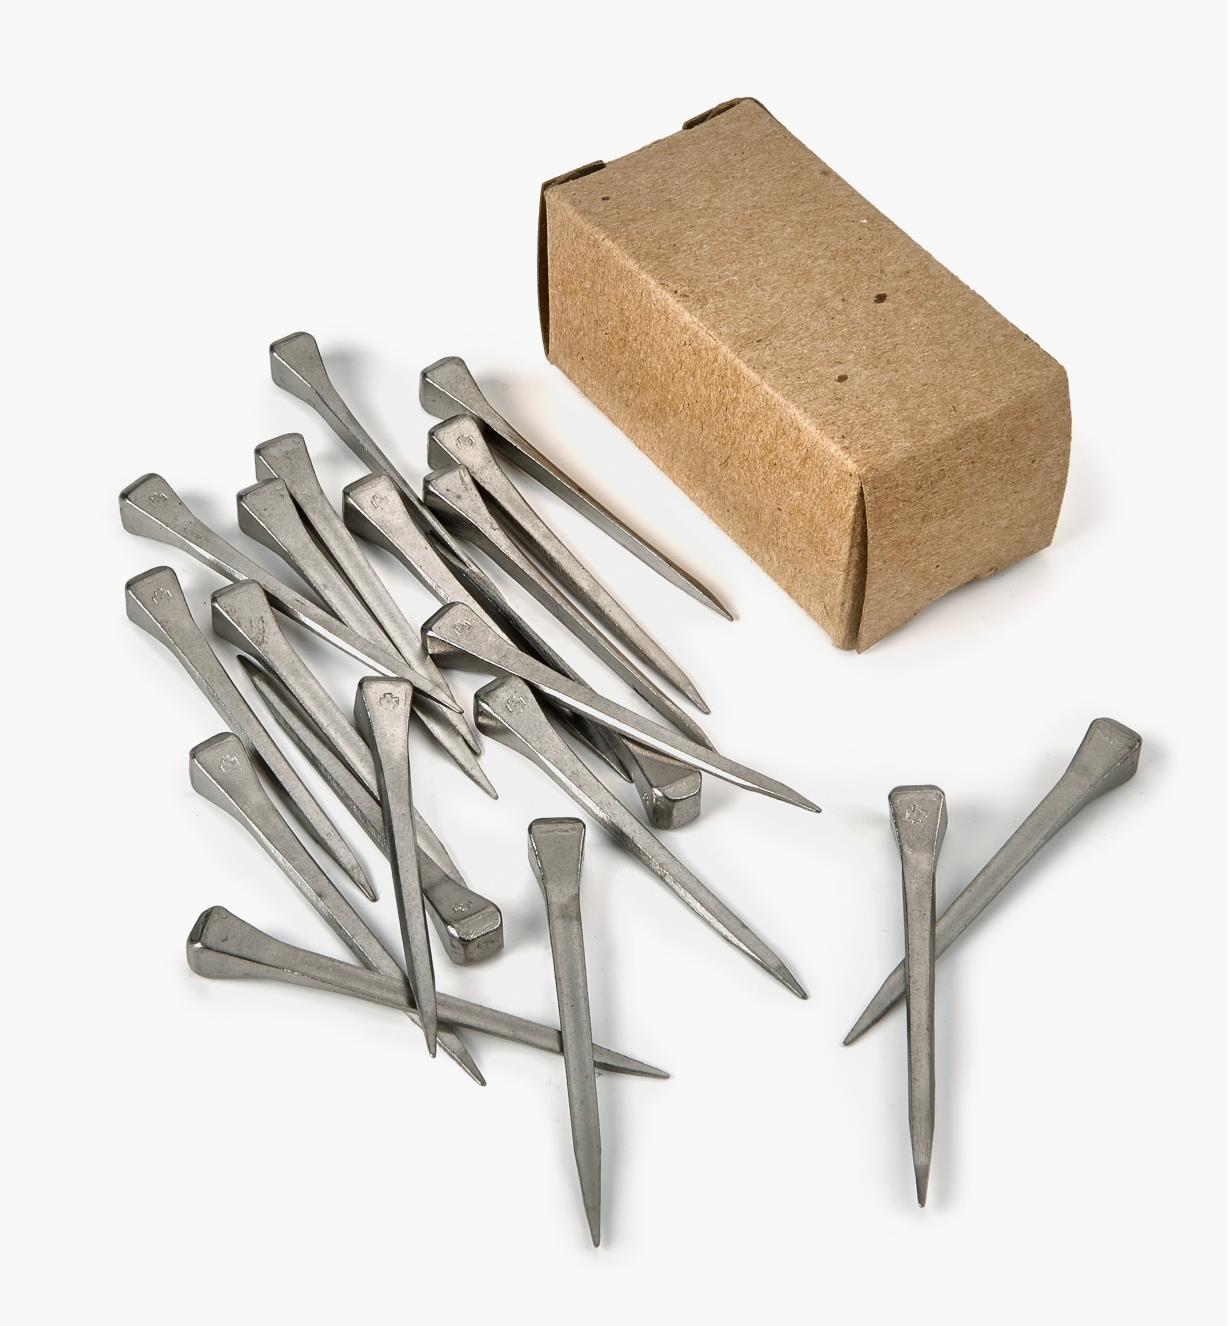 Buy Mondial Horseshoe Nails A-3 in our shop online